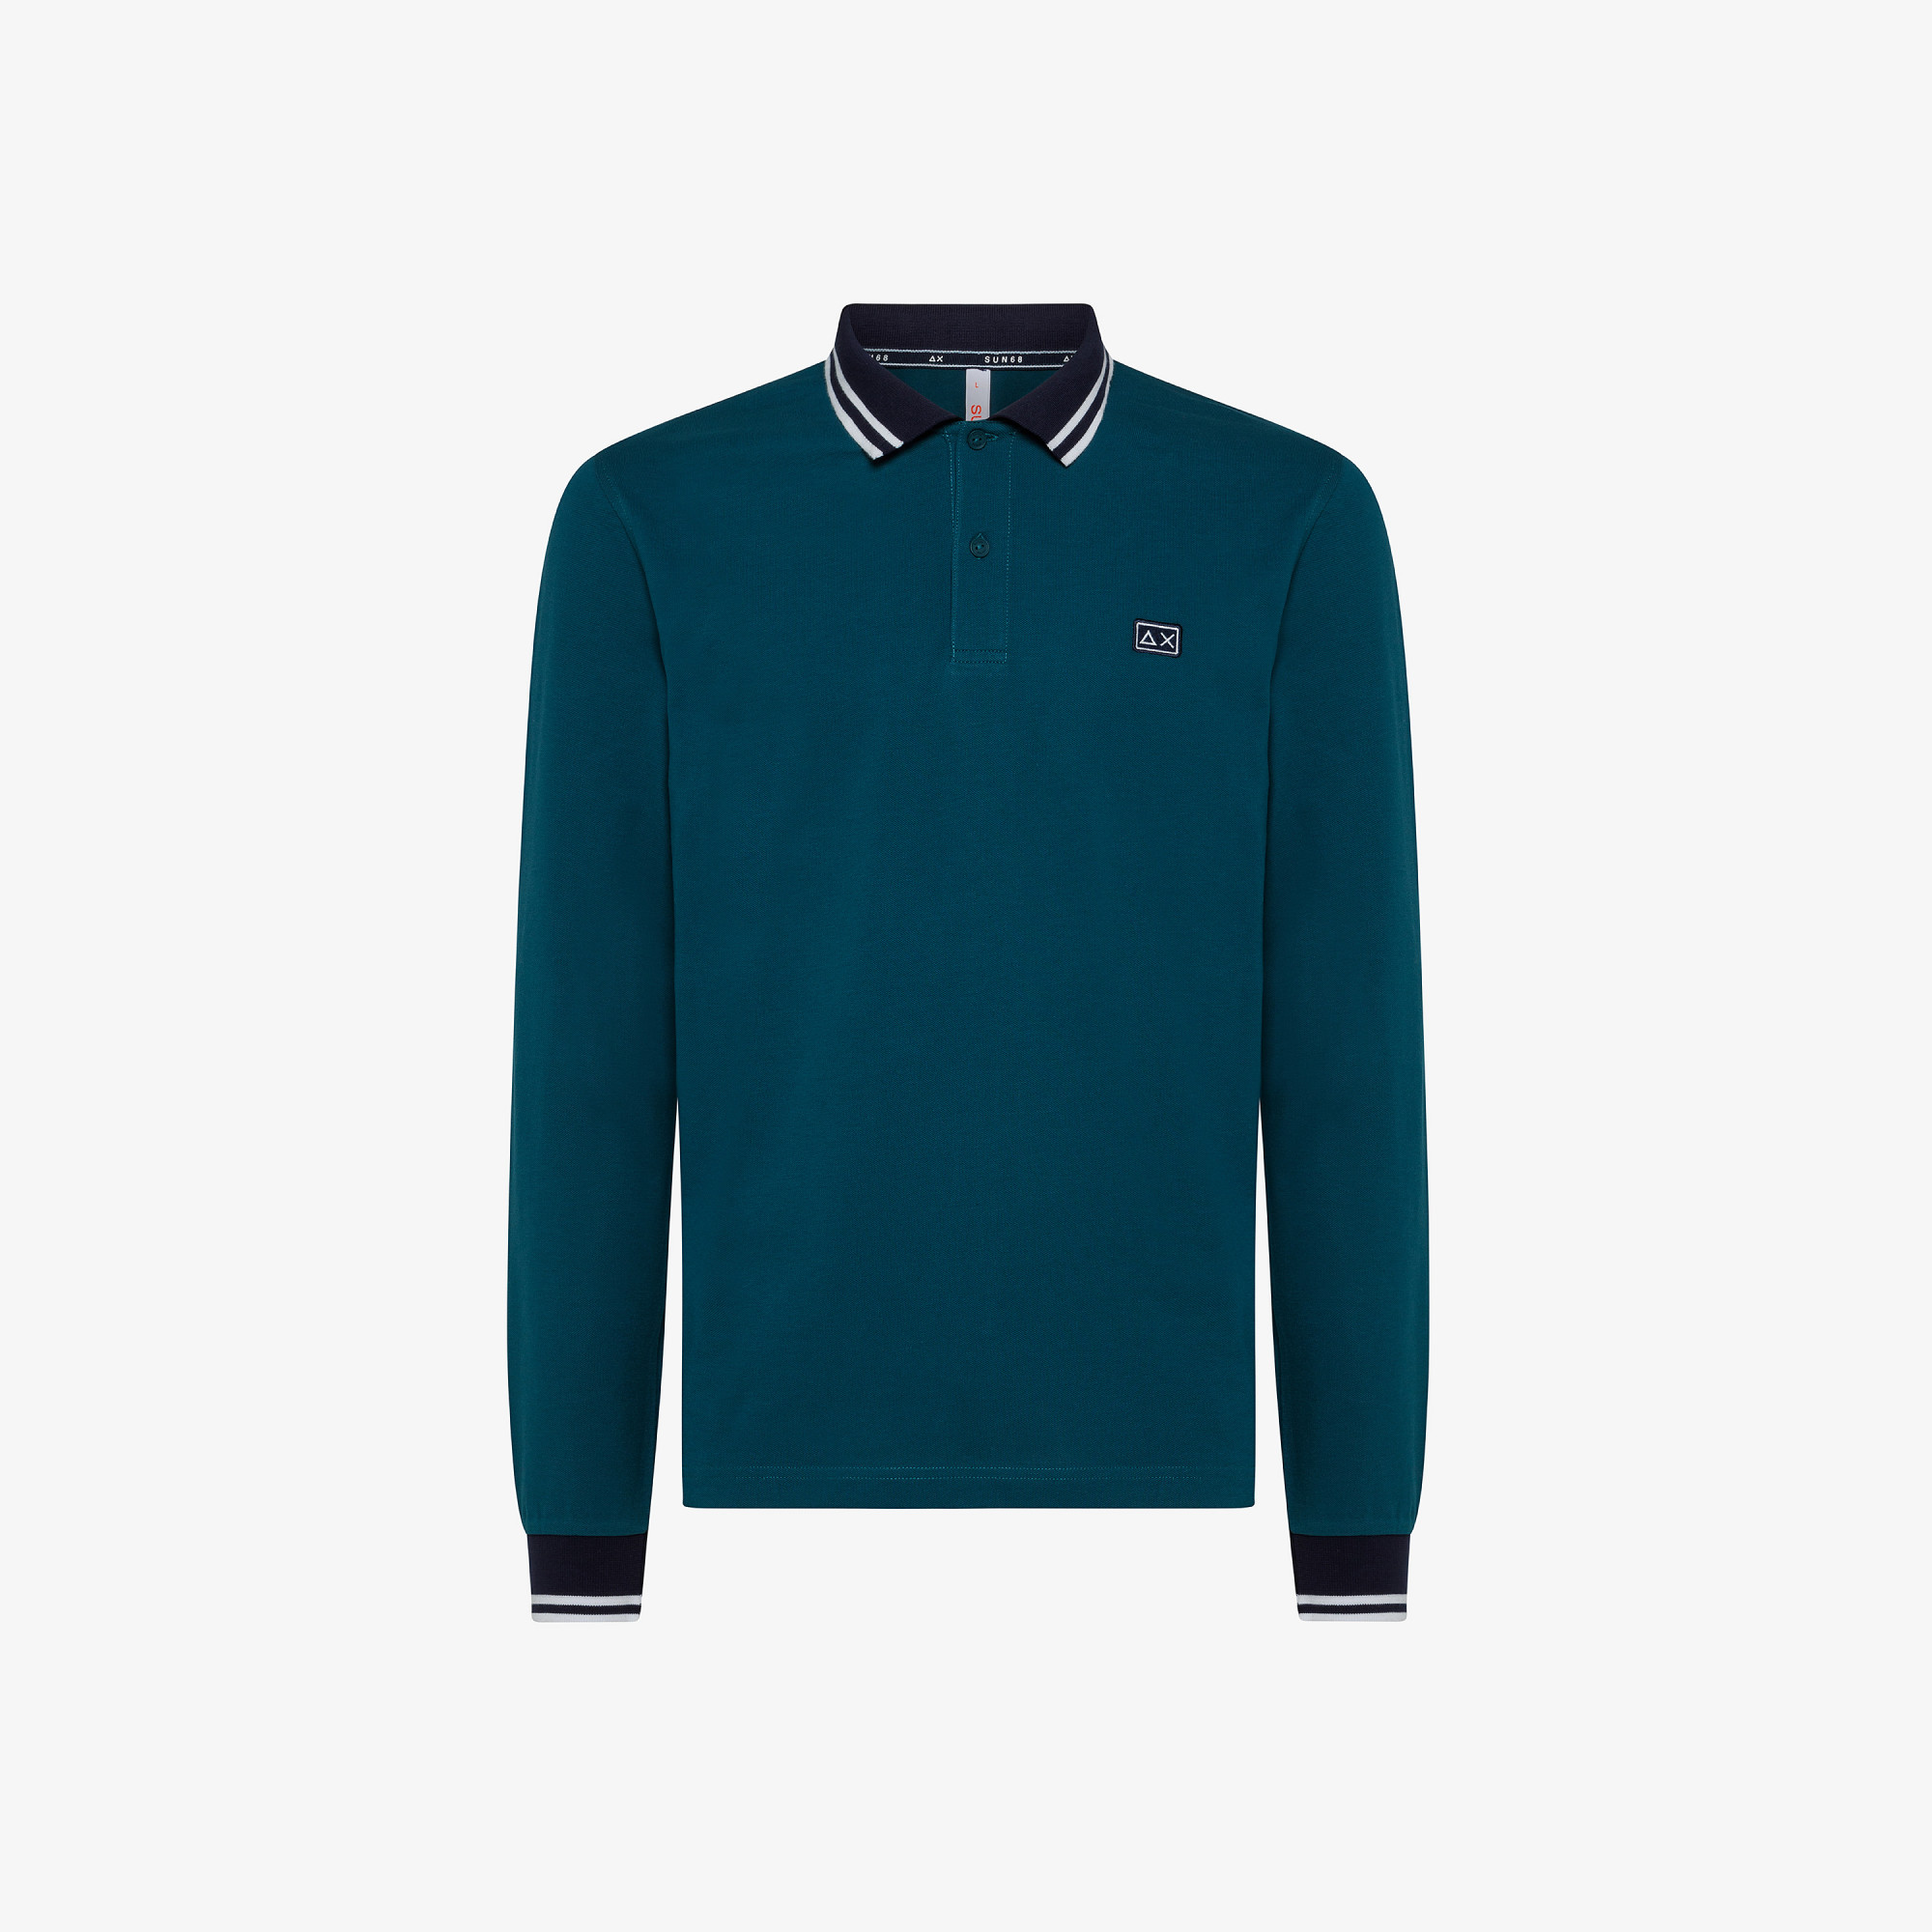 POLO STRIPES ON PLACKET AND CUFFS EL. L/S GREEN EMERALD